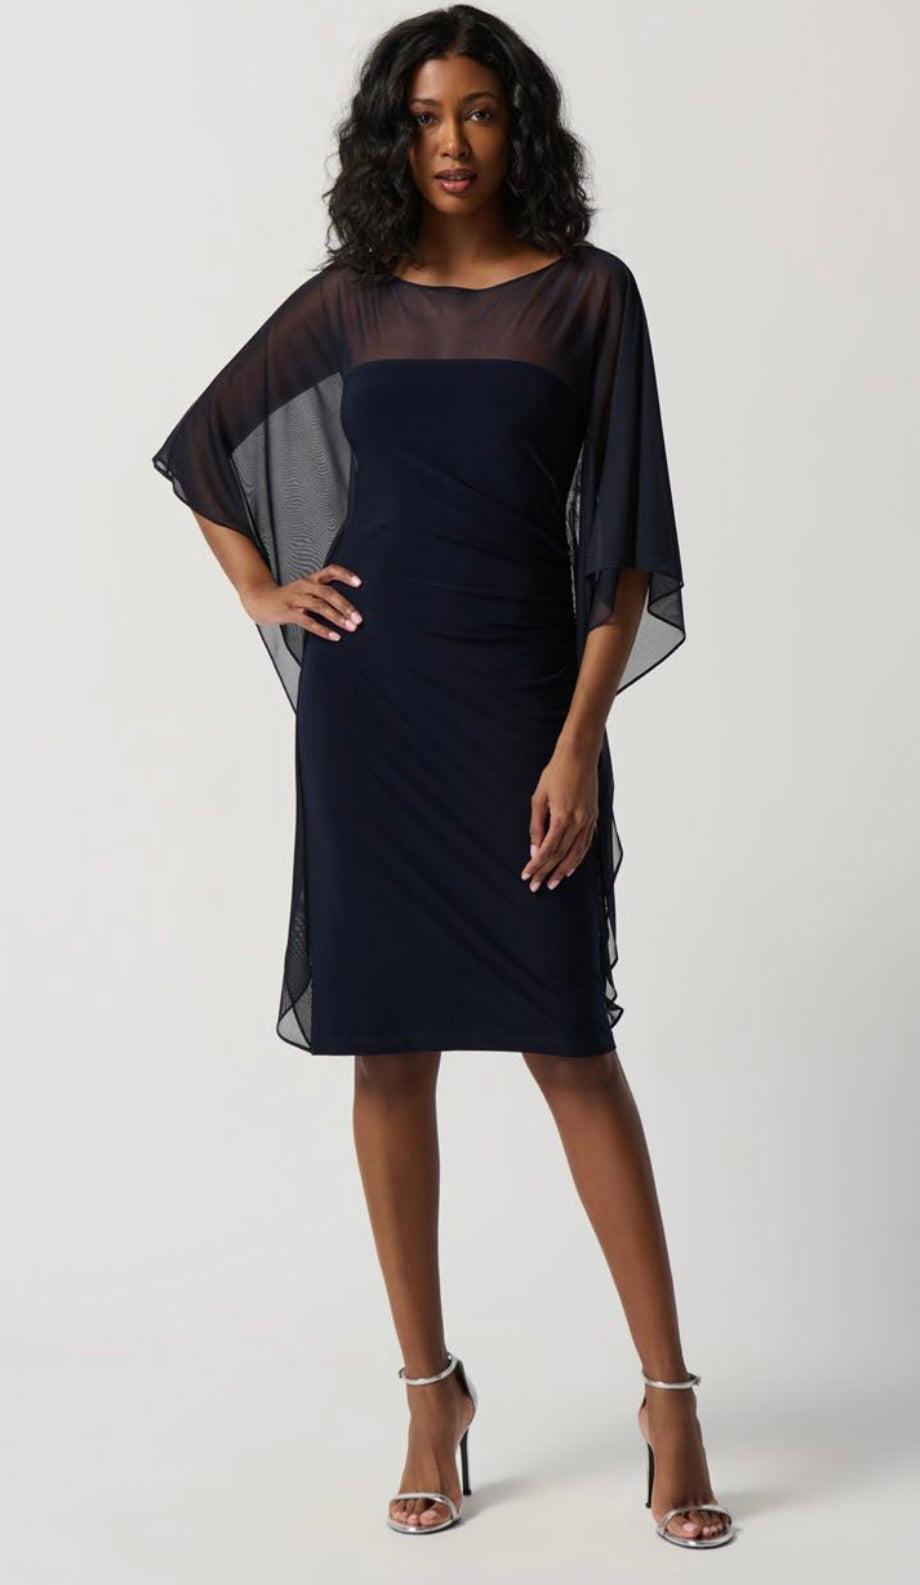 Silhouette Dress - Southern Muse Boutique